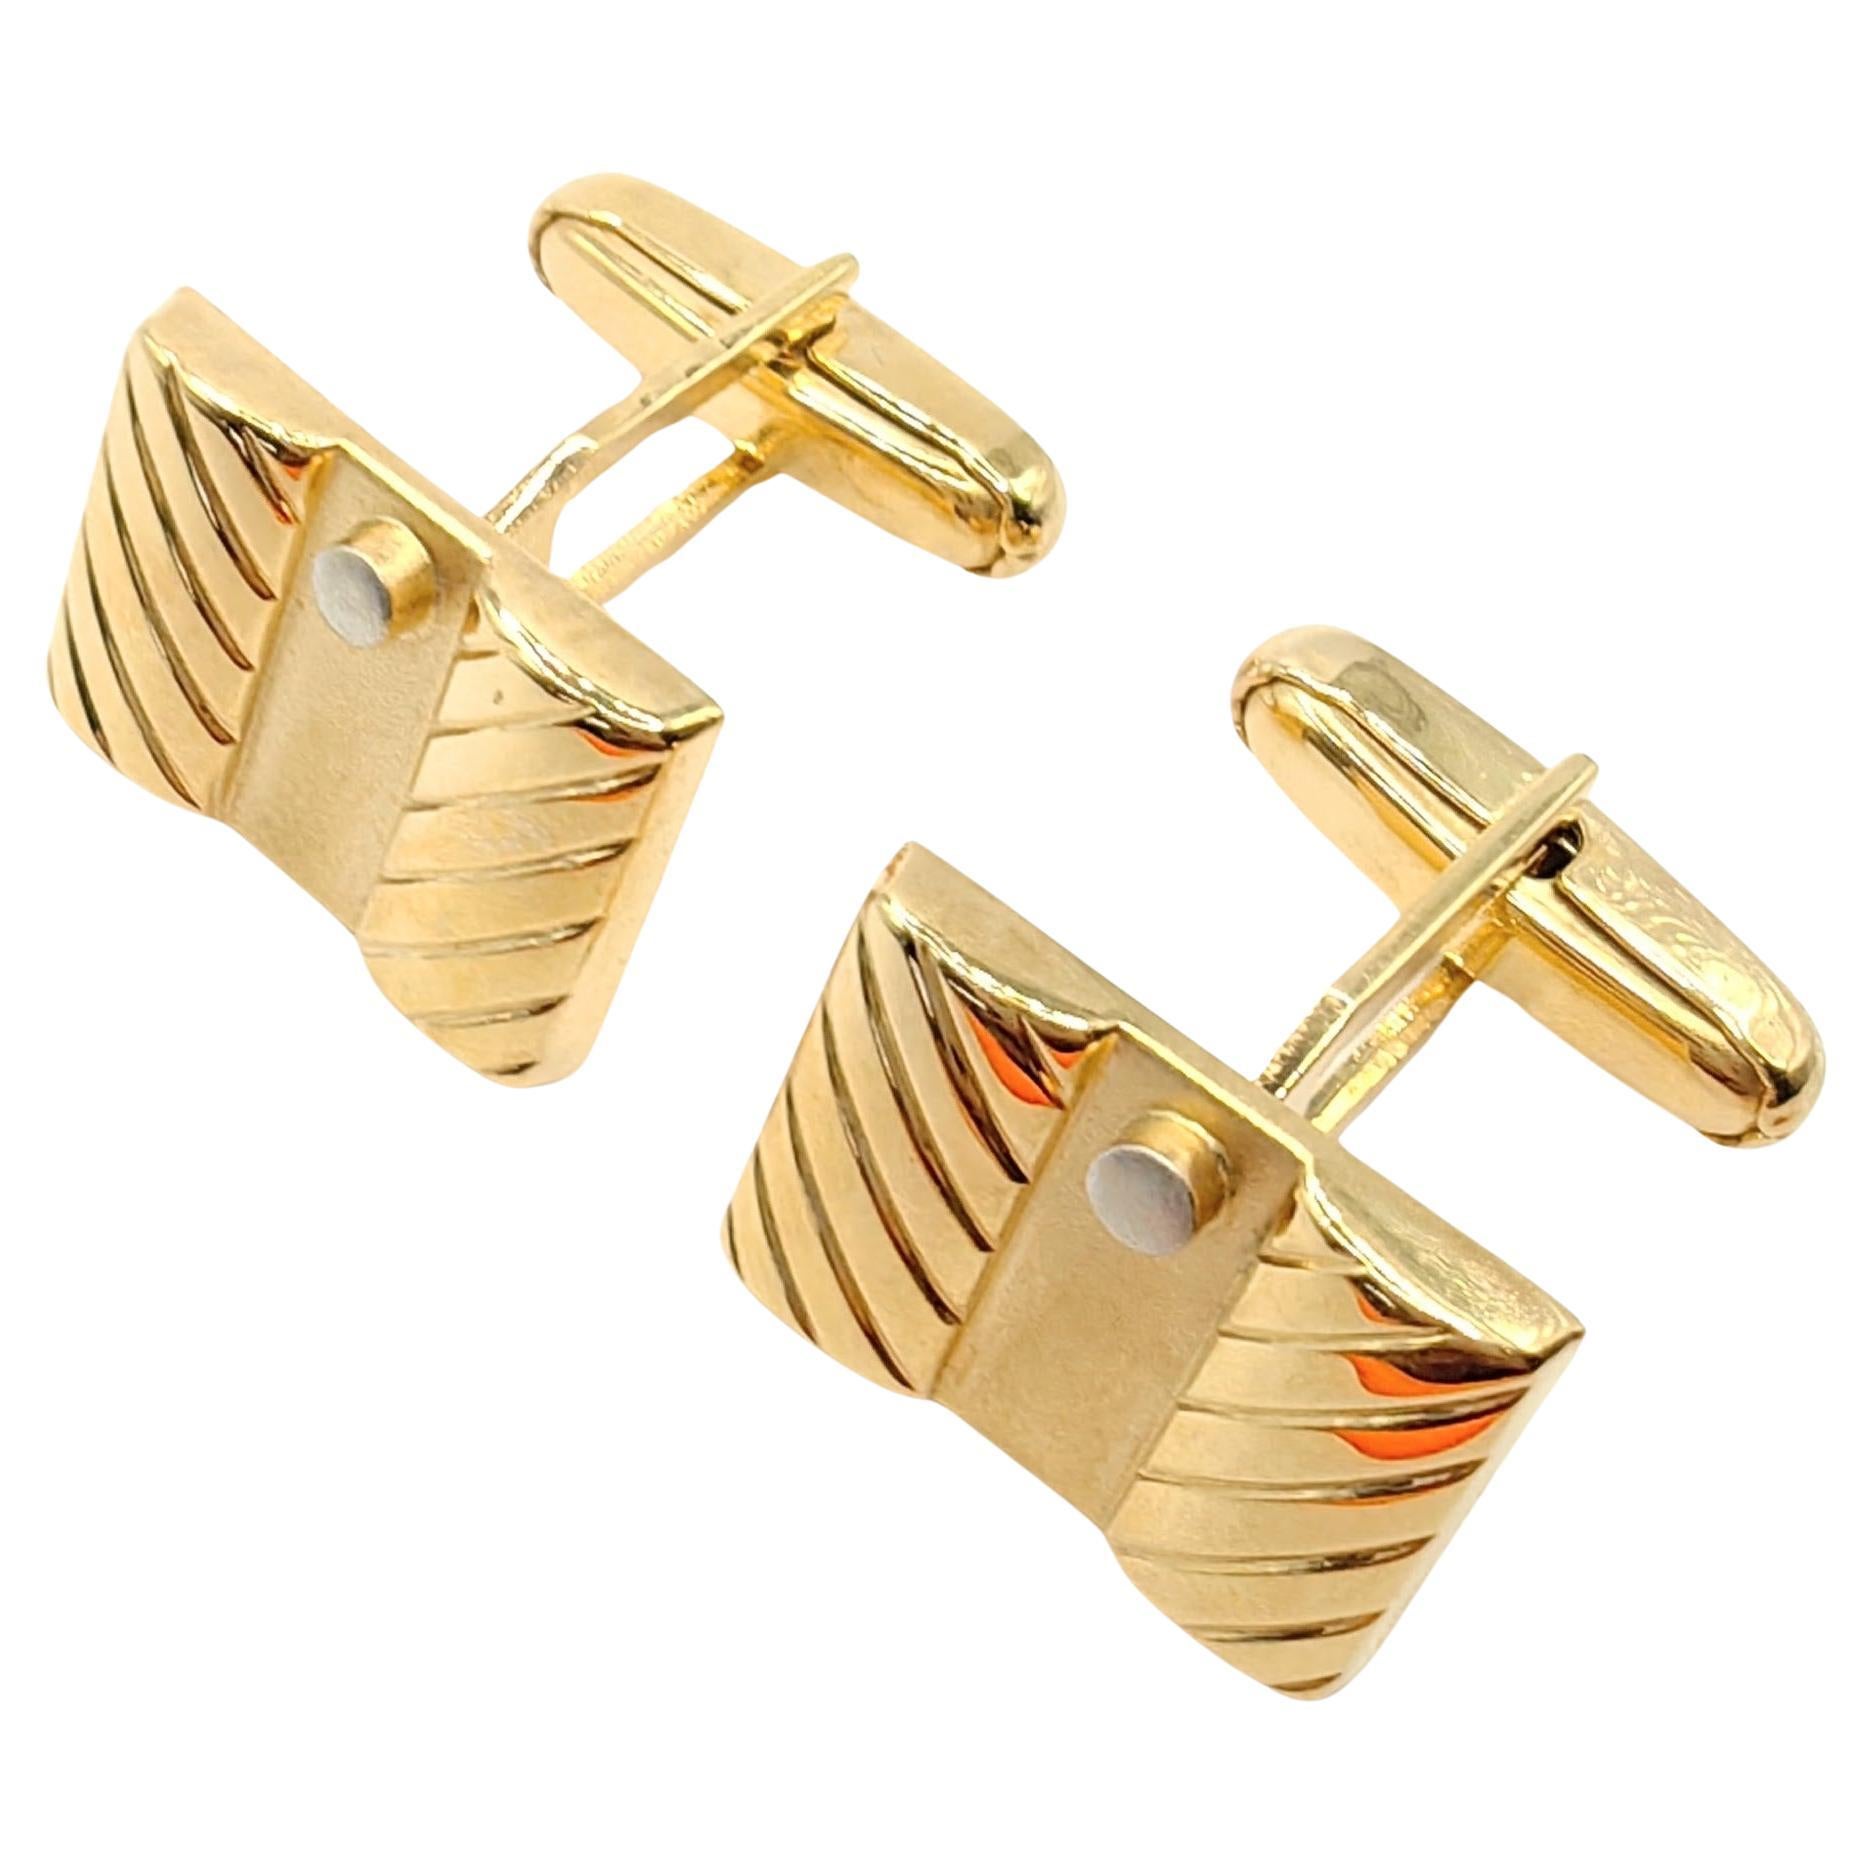 Vintage Geometric Design Cufflinks in 18K Yellow & White Two-tone Gold